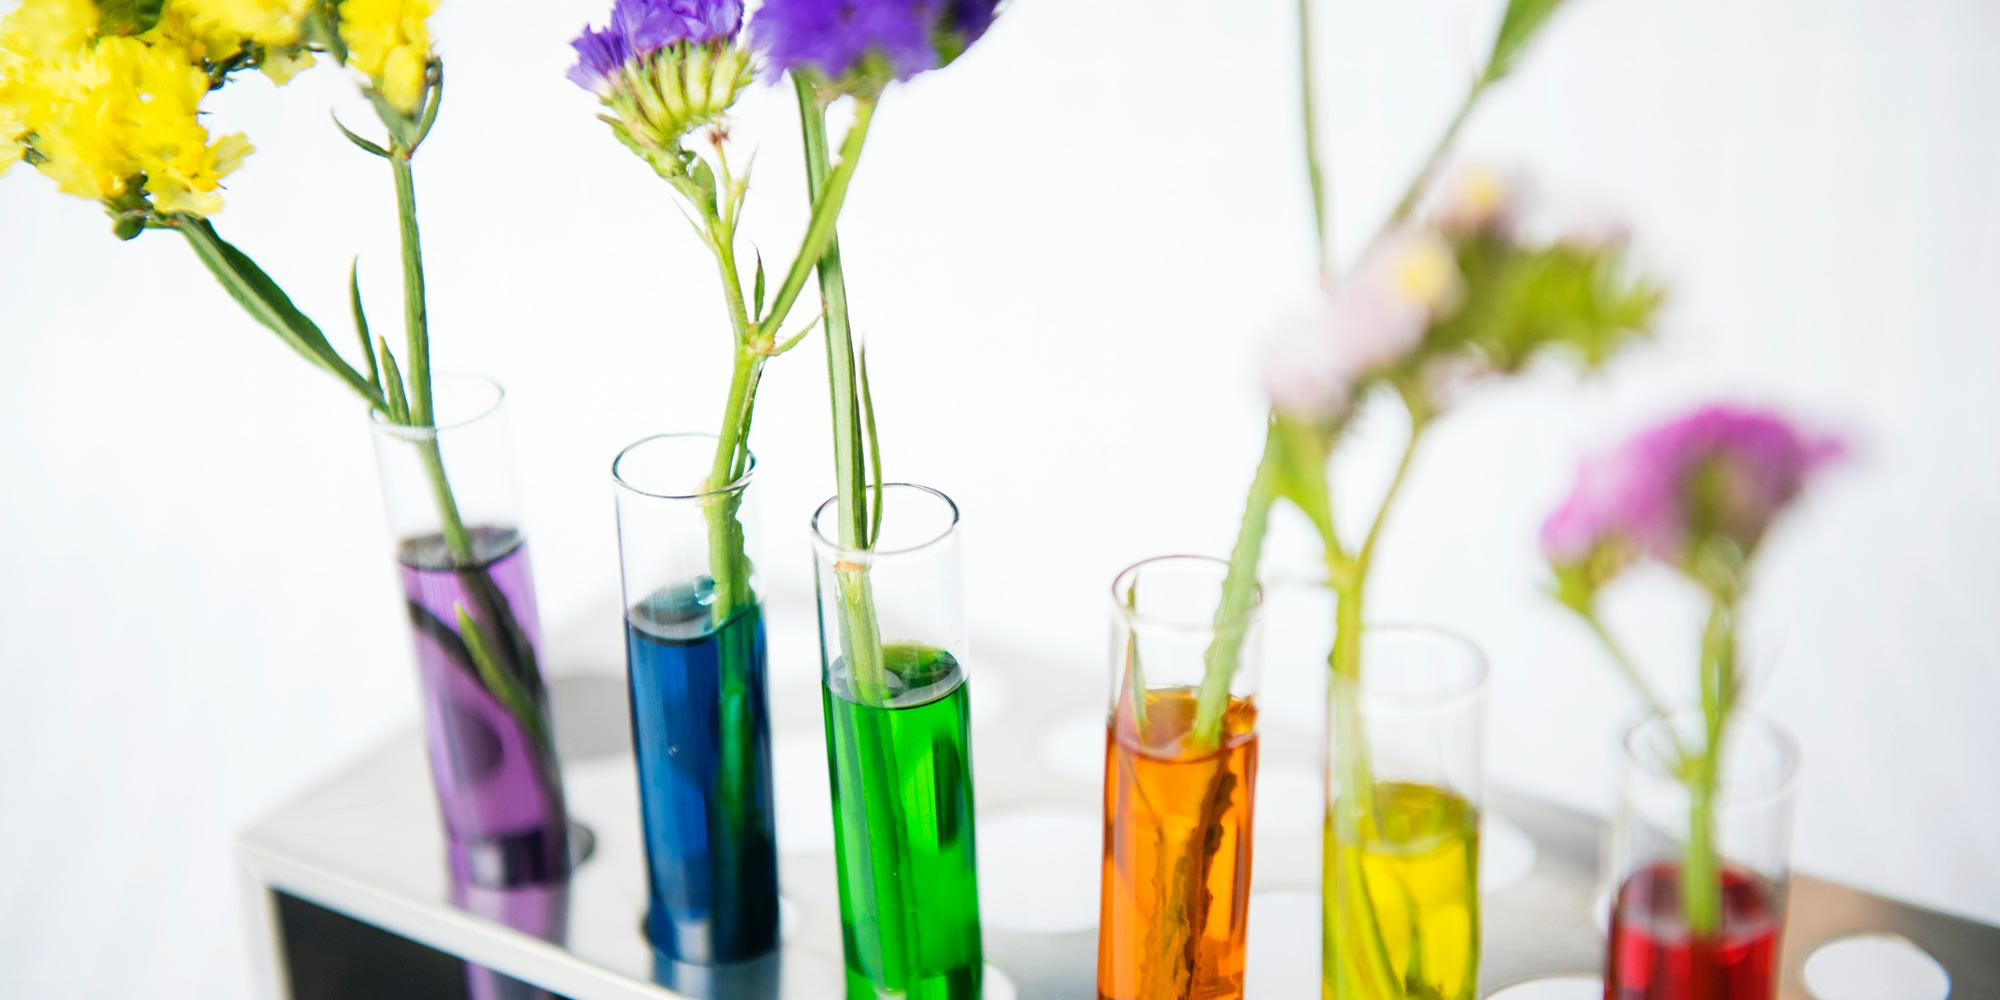 flowers in test tubes